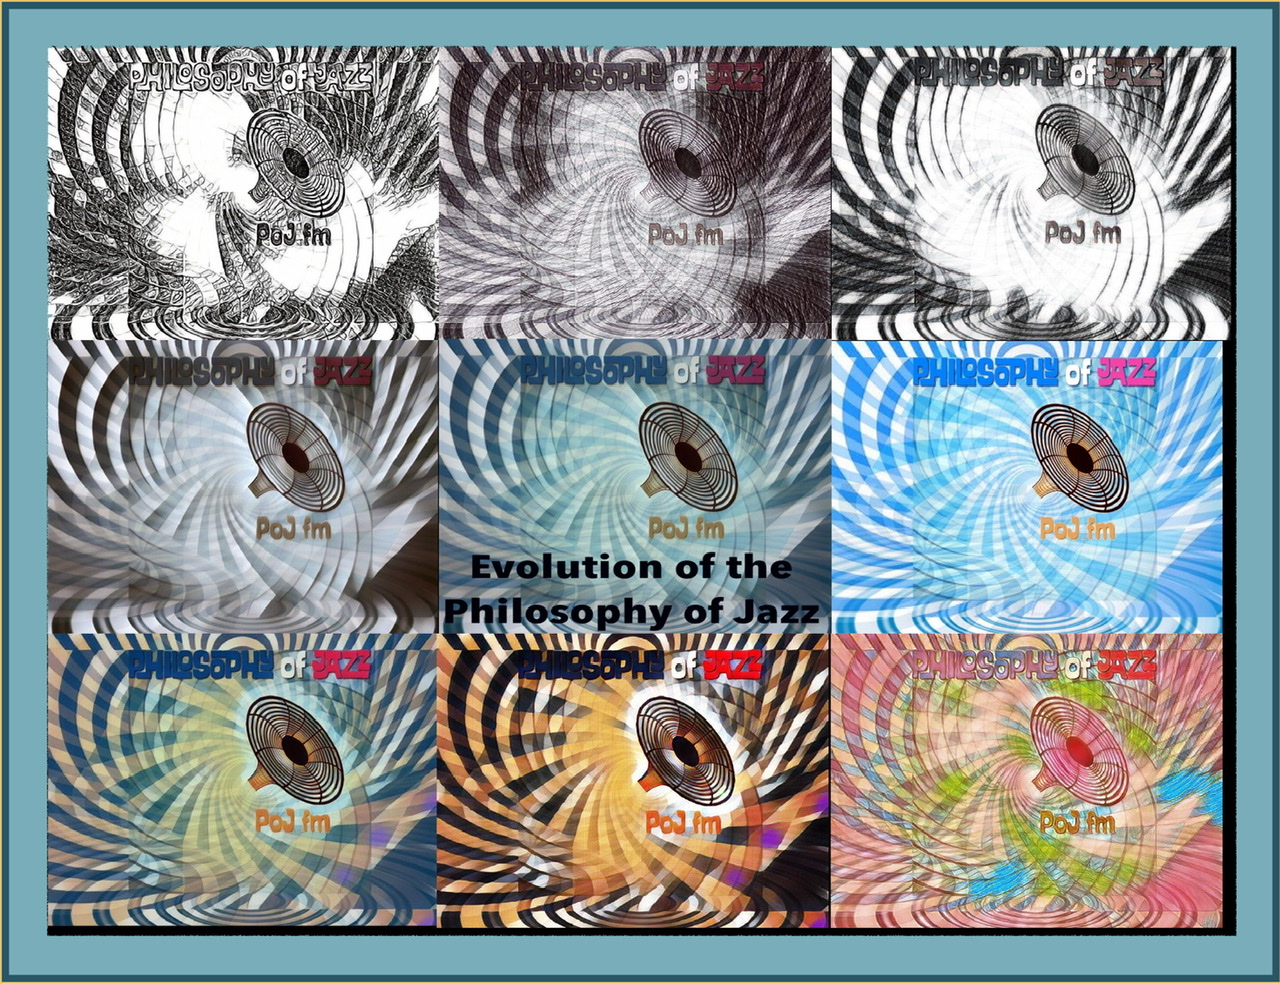 Three by three collage of same basic image but with differently colored POJ logos with different art effects framed with gray border containing in the center the title "Evolution of the Philosophy of Jazz."